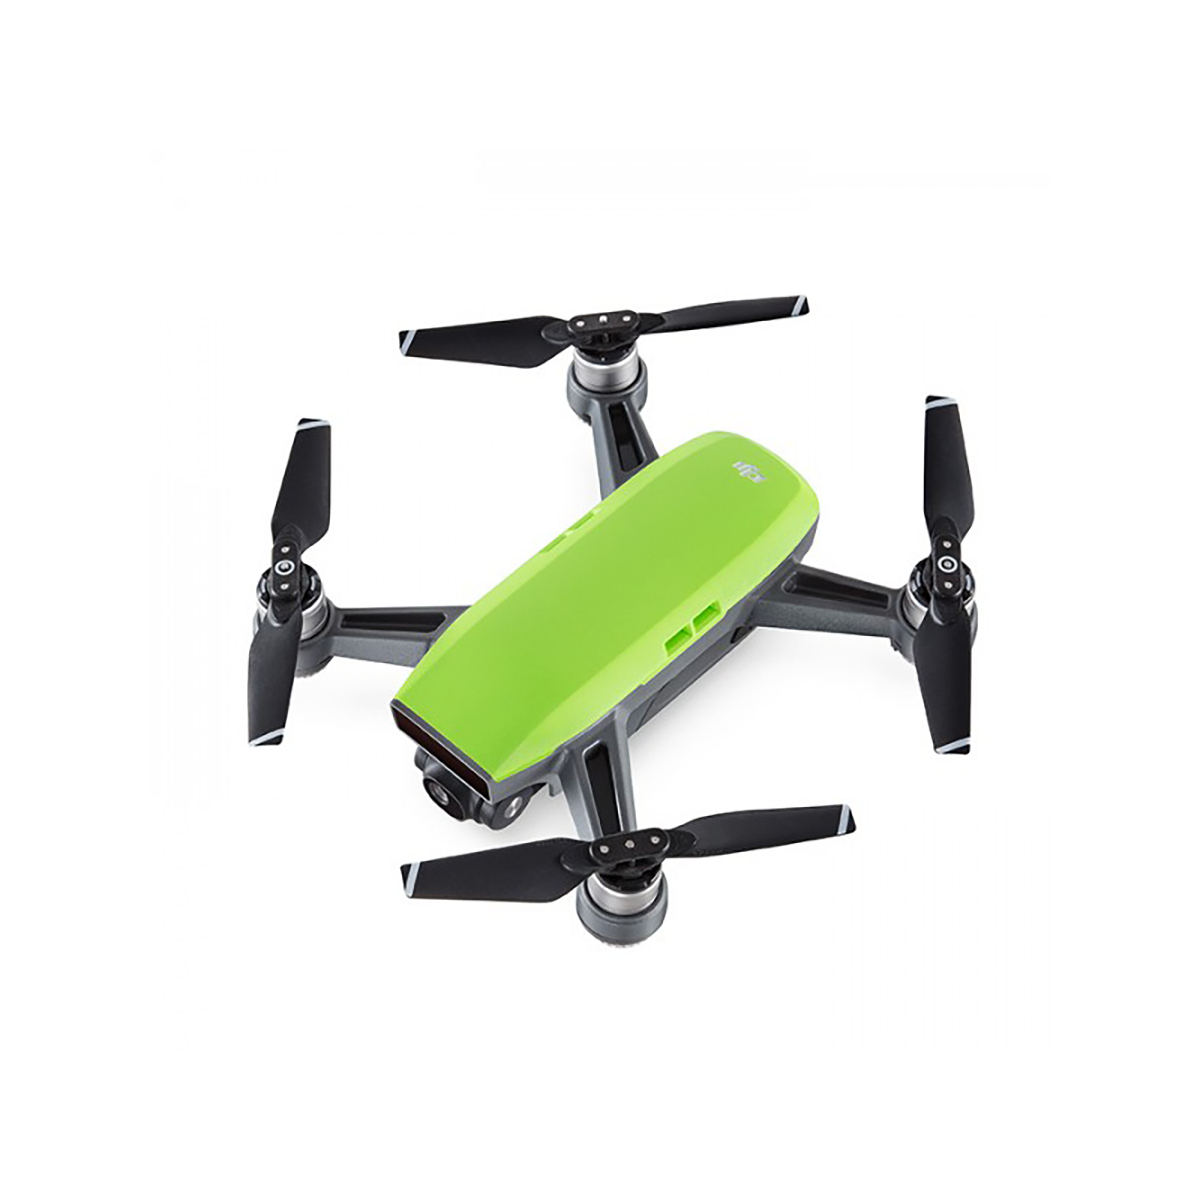 DJI Spark Fly More Combo (Meadow Green) | AimToFind.com